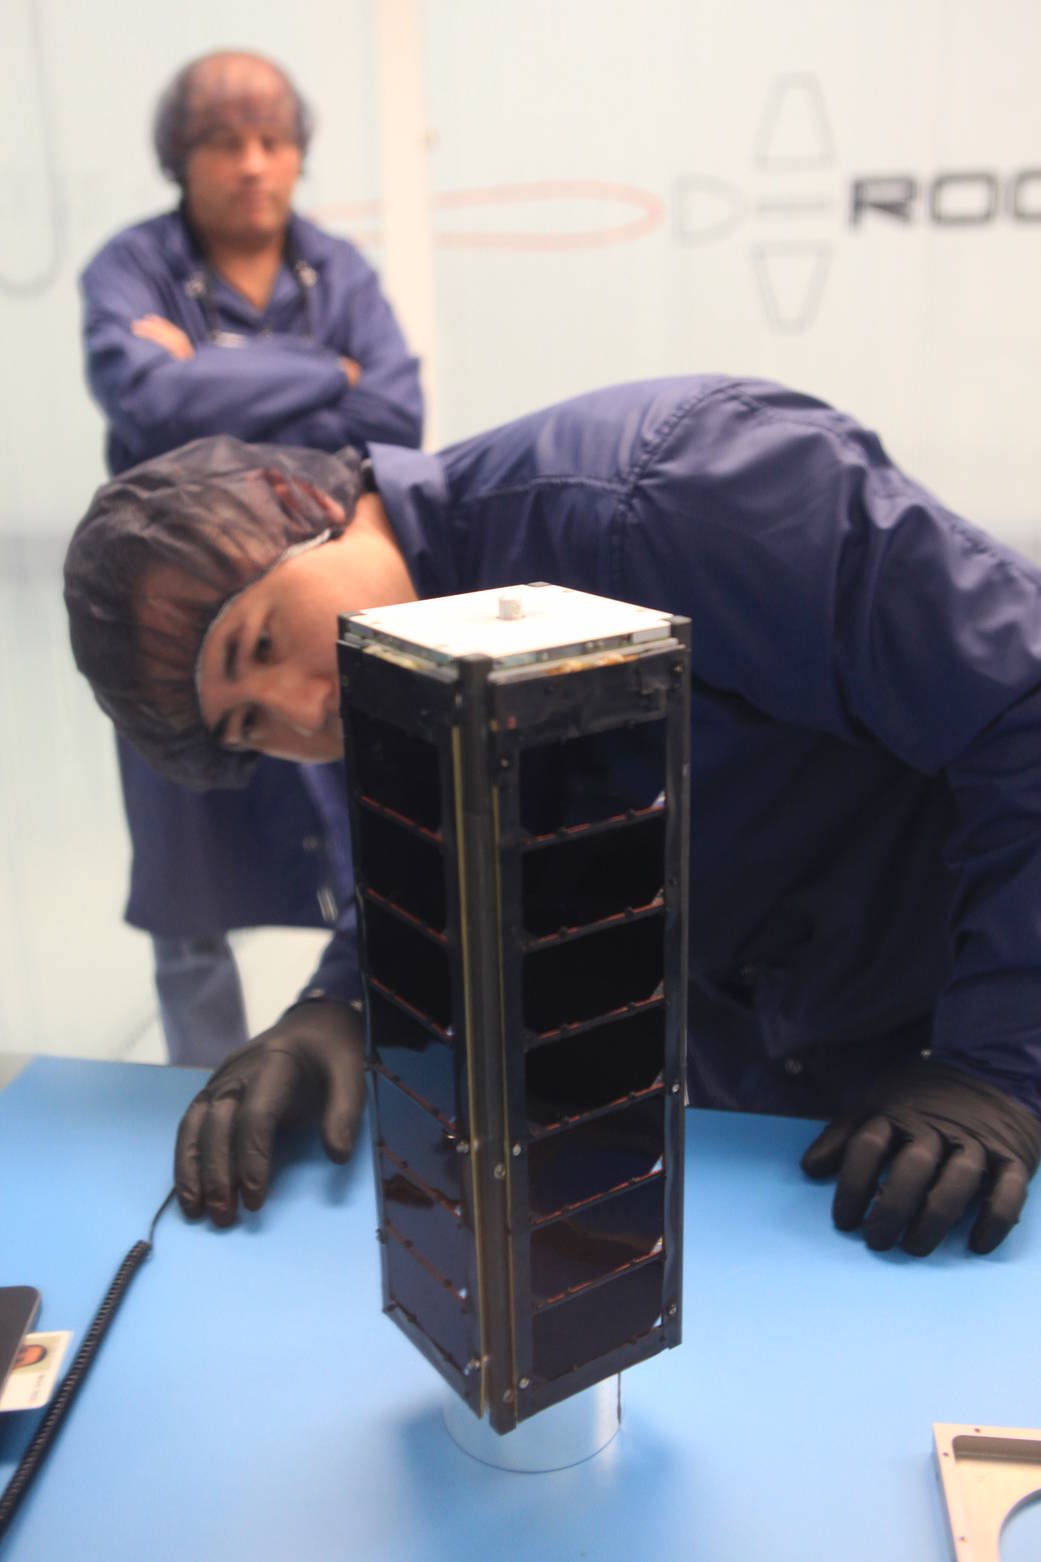 The Shields-1 CubeSat is prepared for launch.